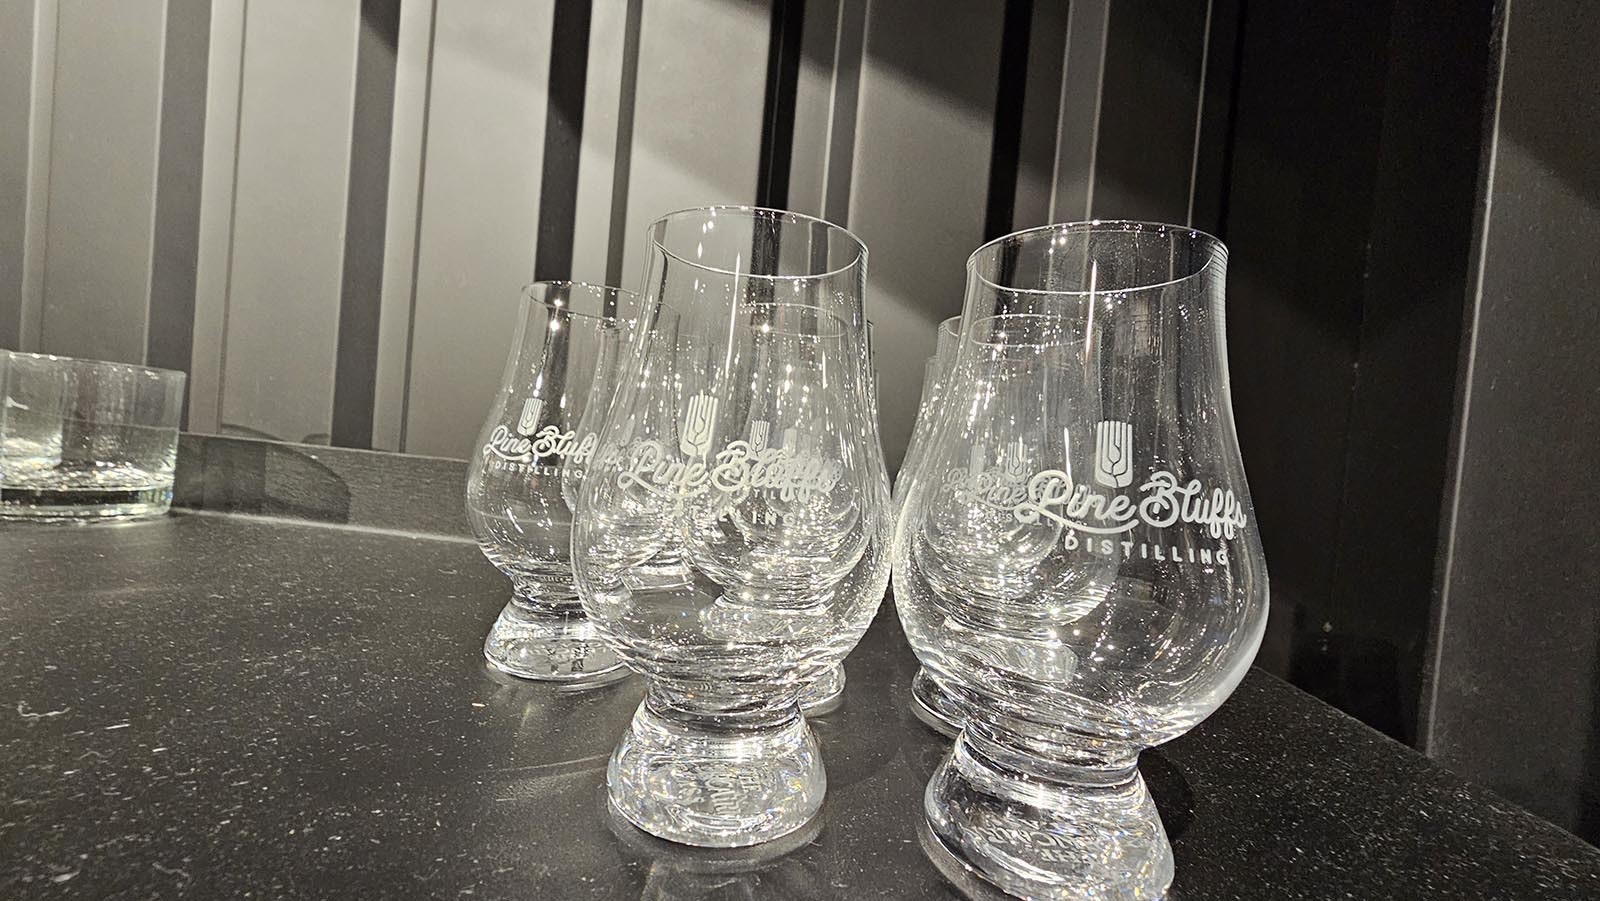 Whiskey glasses are for sale as well at Pine Bluffs Distilling. Similar to wine glasses, the shape helps keep scent molecules together, so that the whiskey may be more fully tasted and enjoyed.